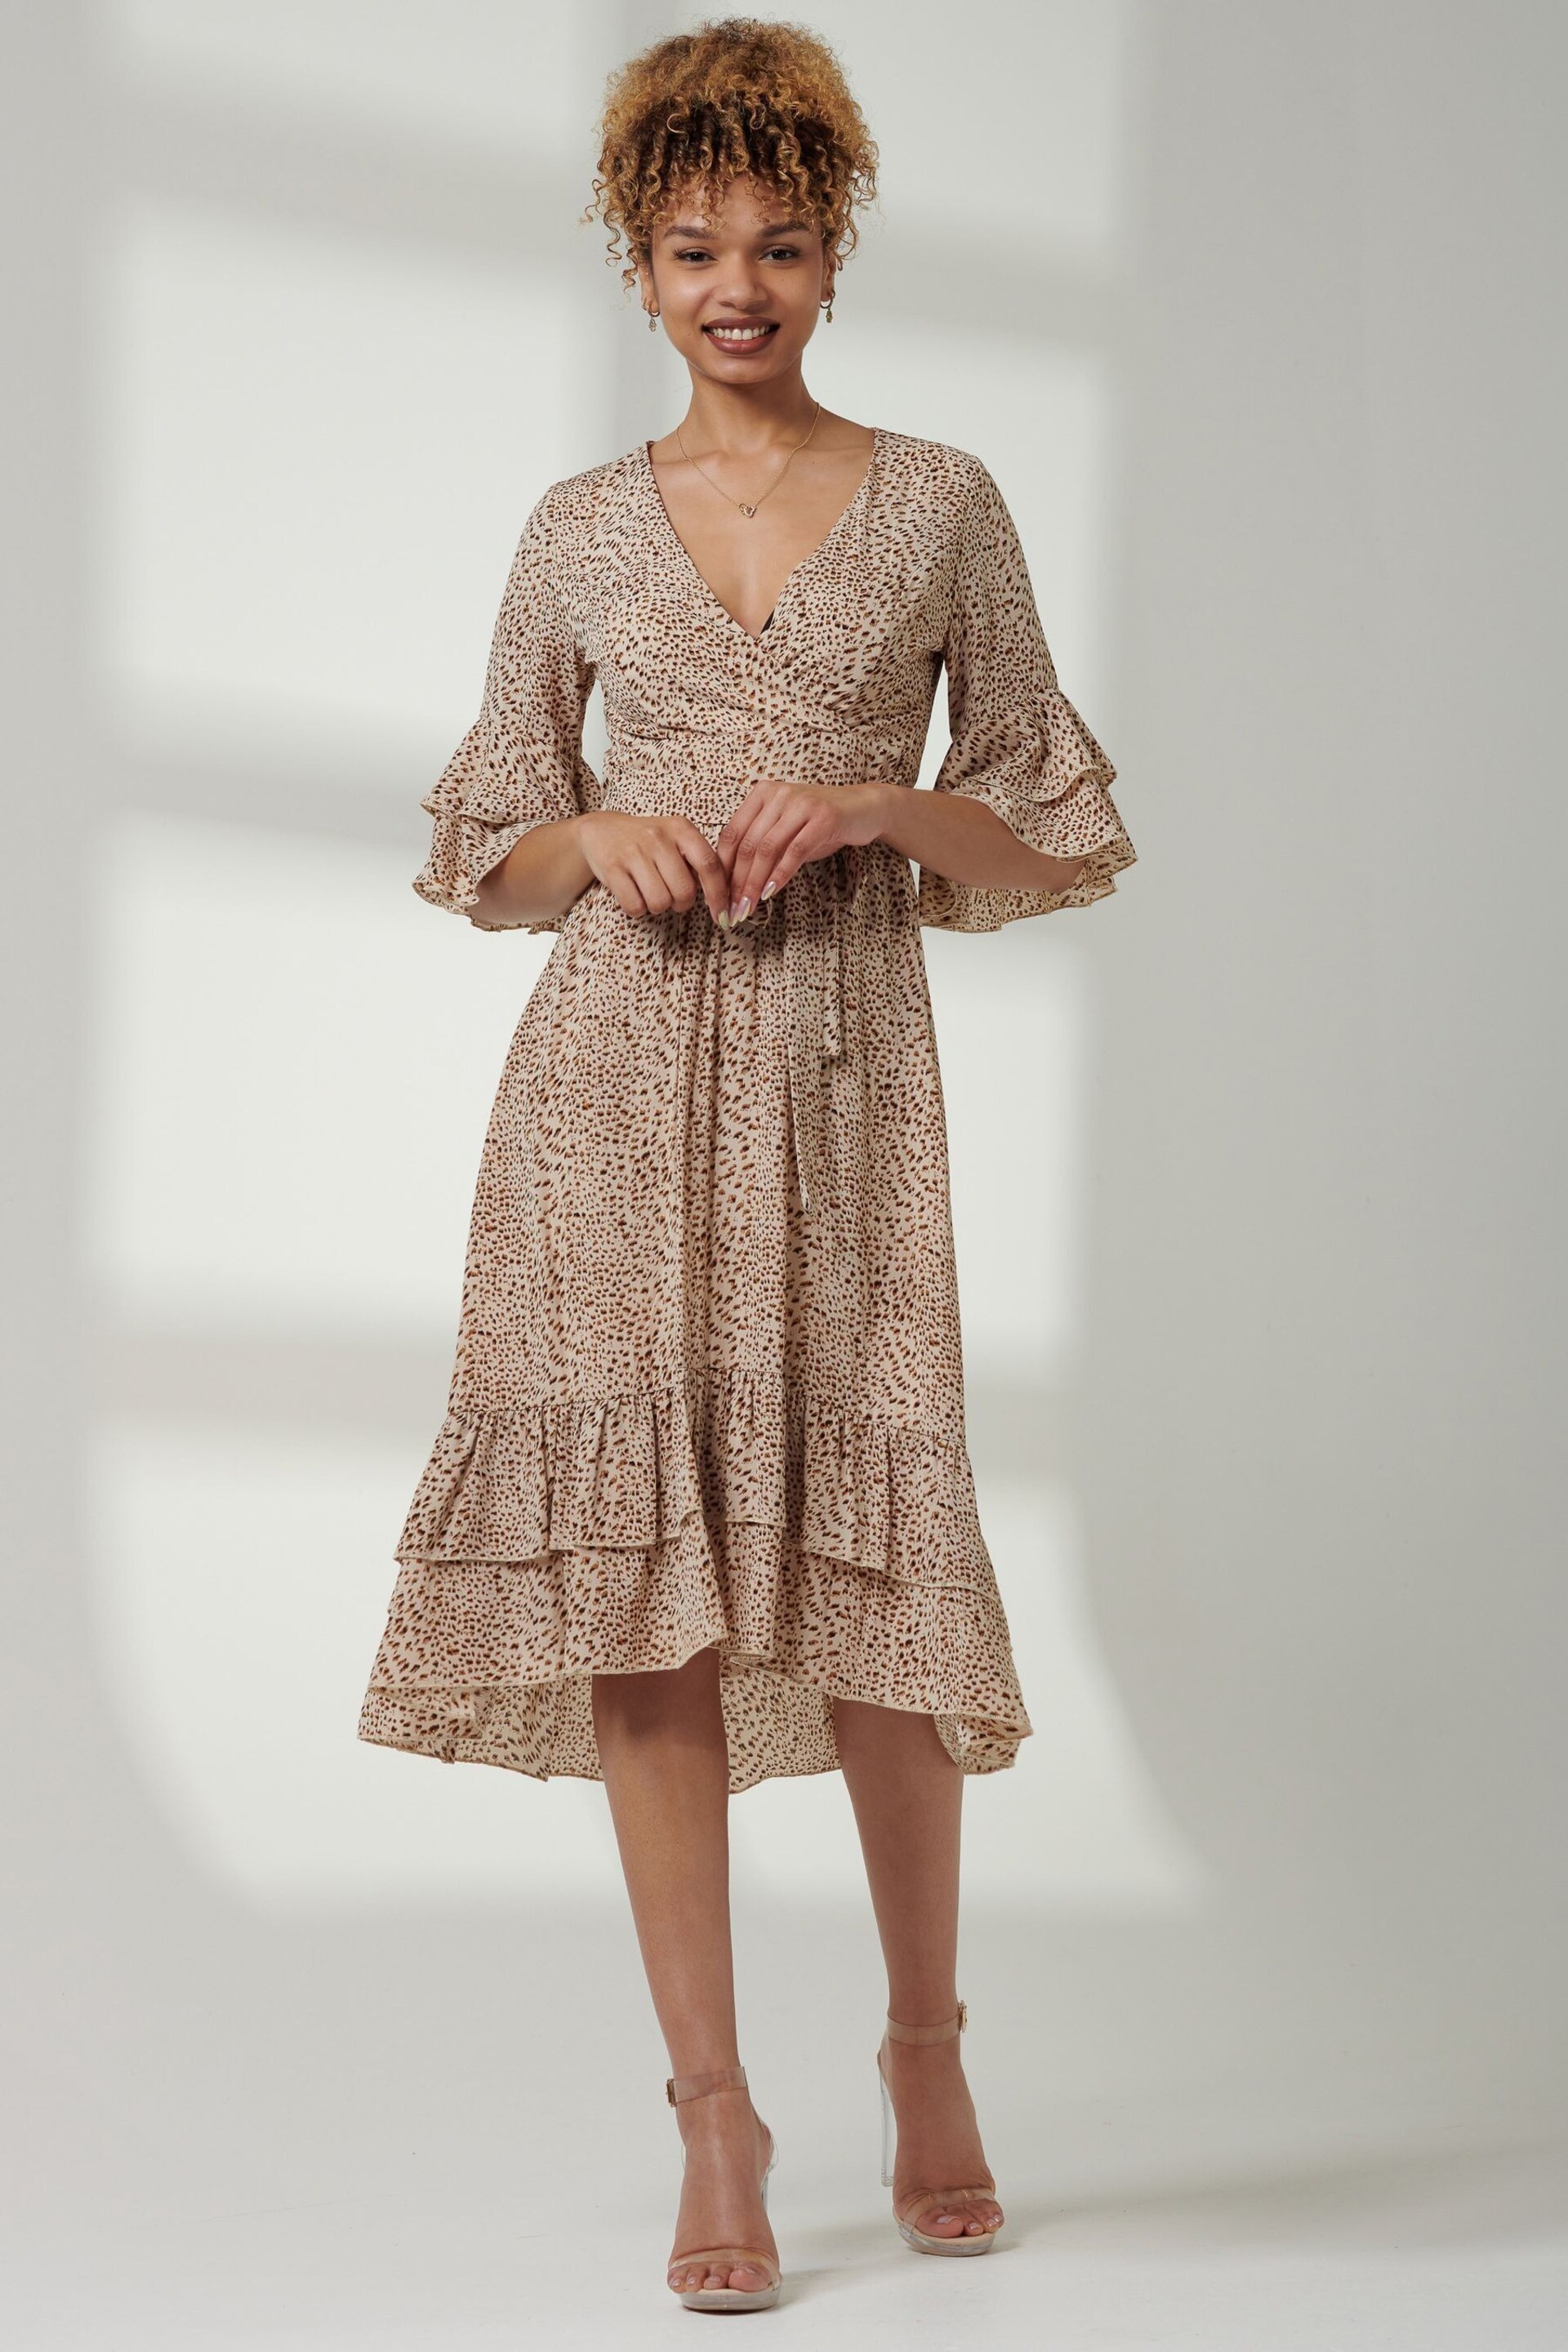 Jolie Moi Brown Tiered Detail Smock Dress - Image 4 of 6